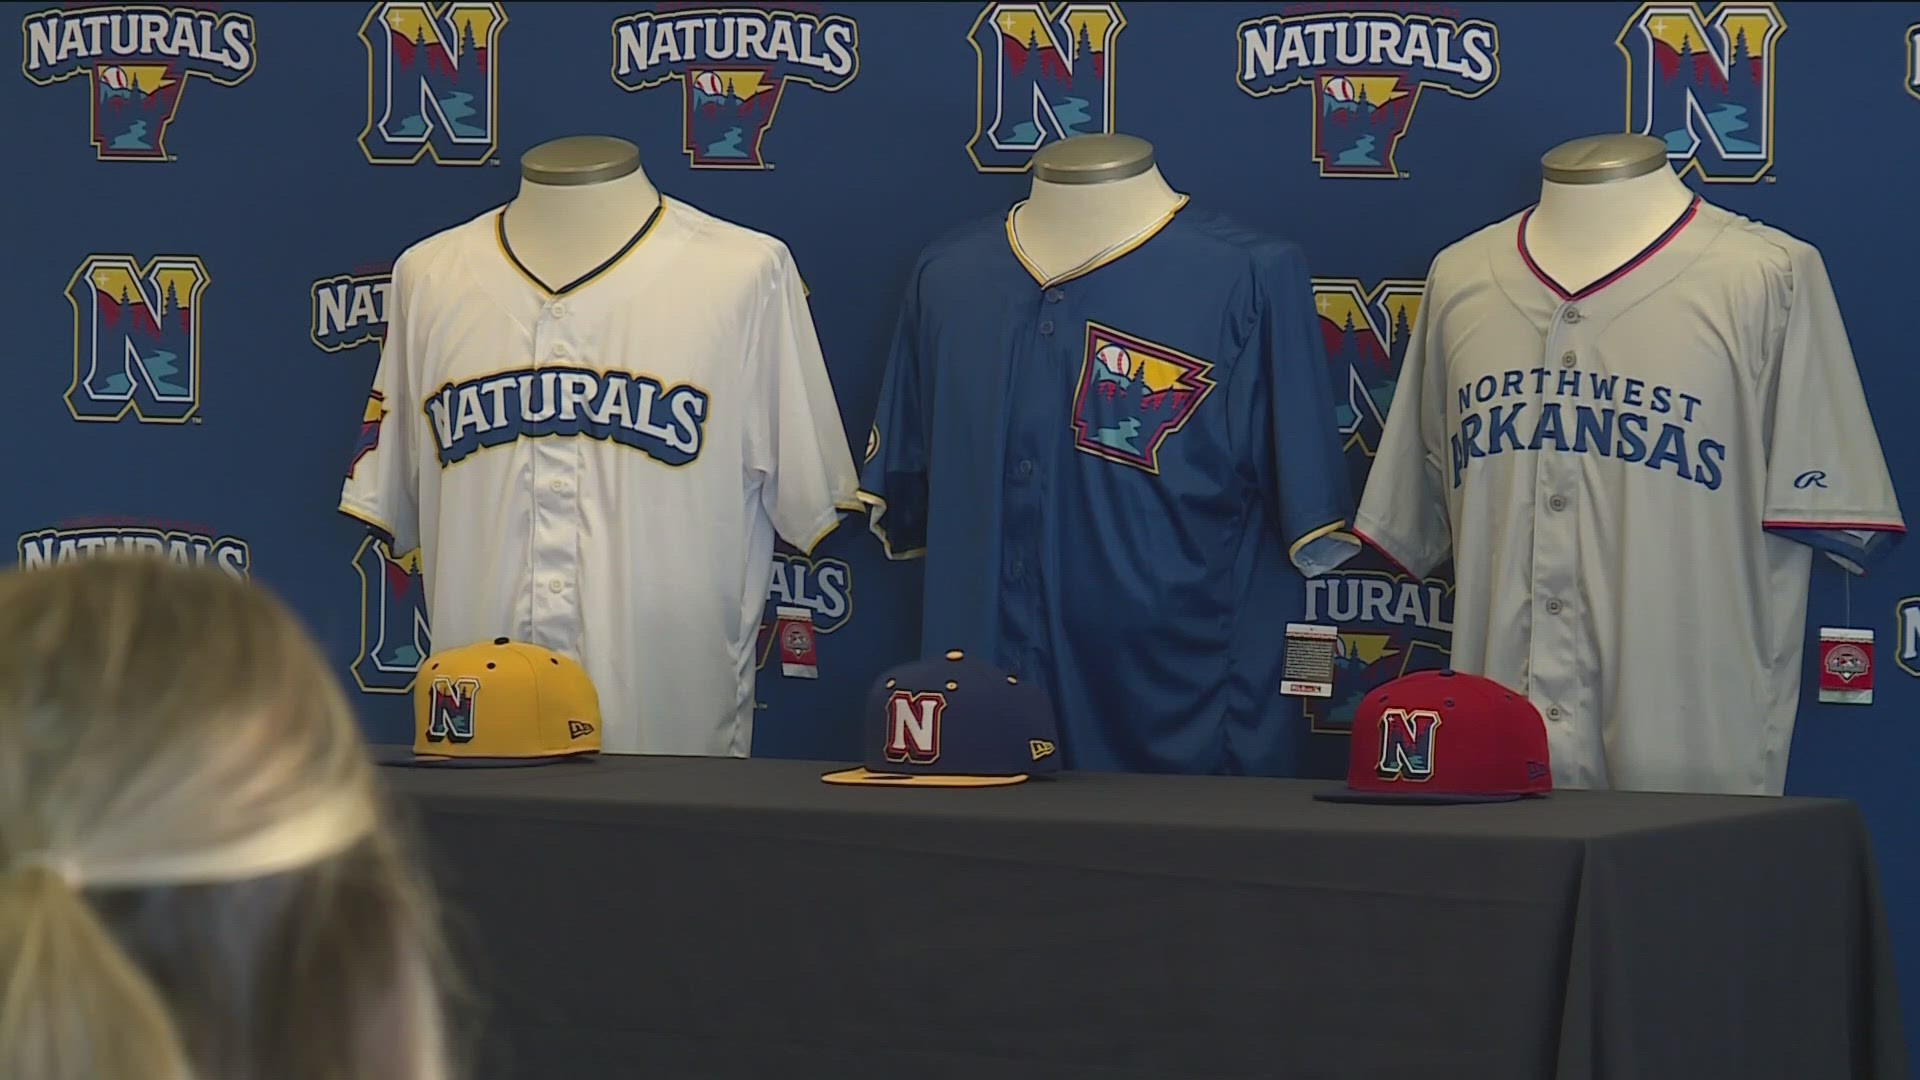 The professional baseball league in Northwest Arkansas is getting an updated look.